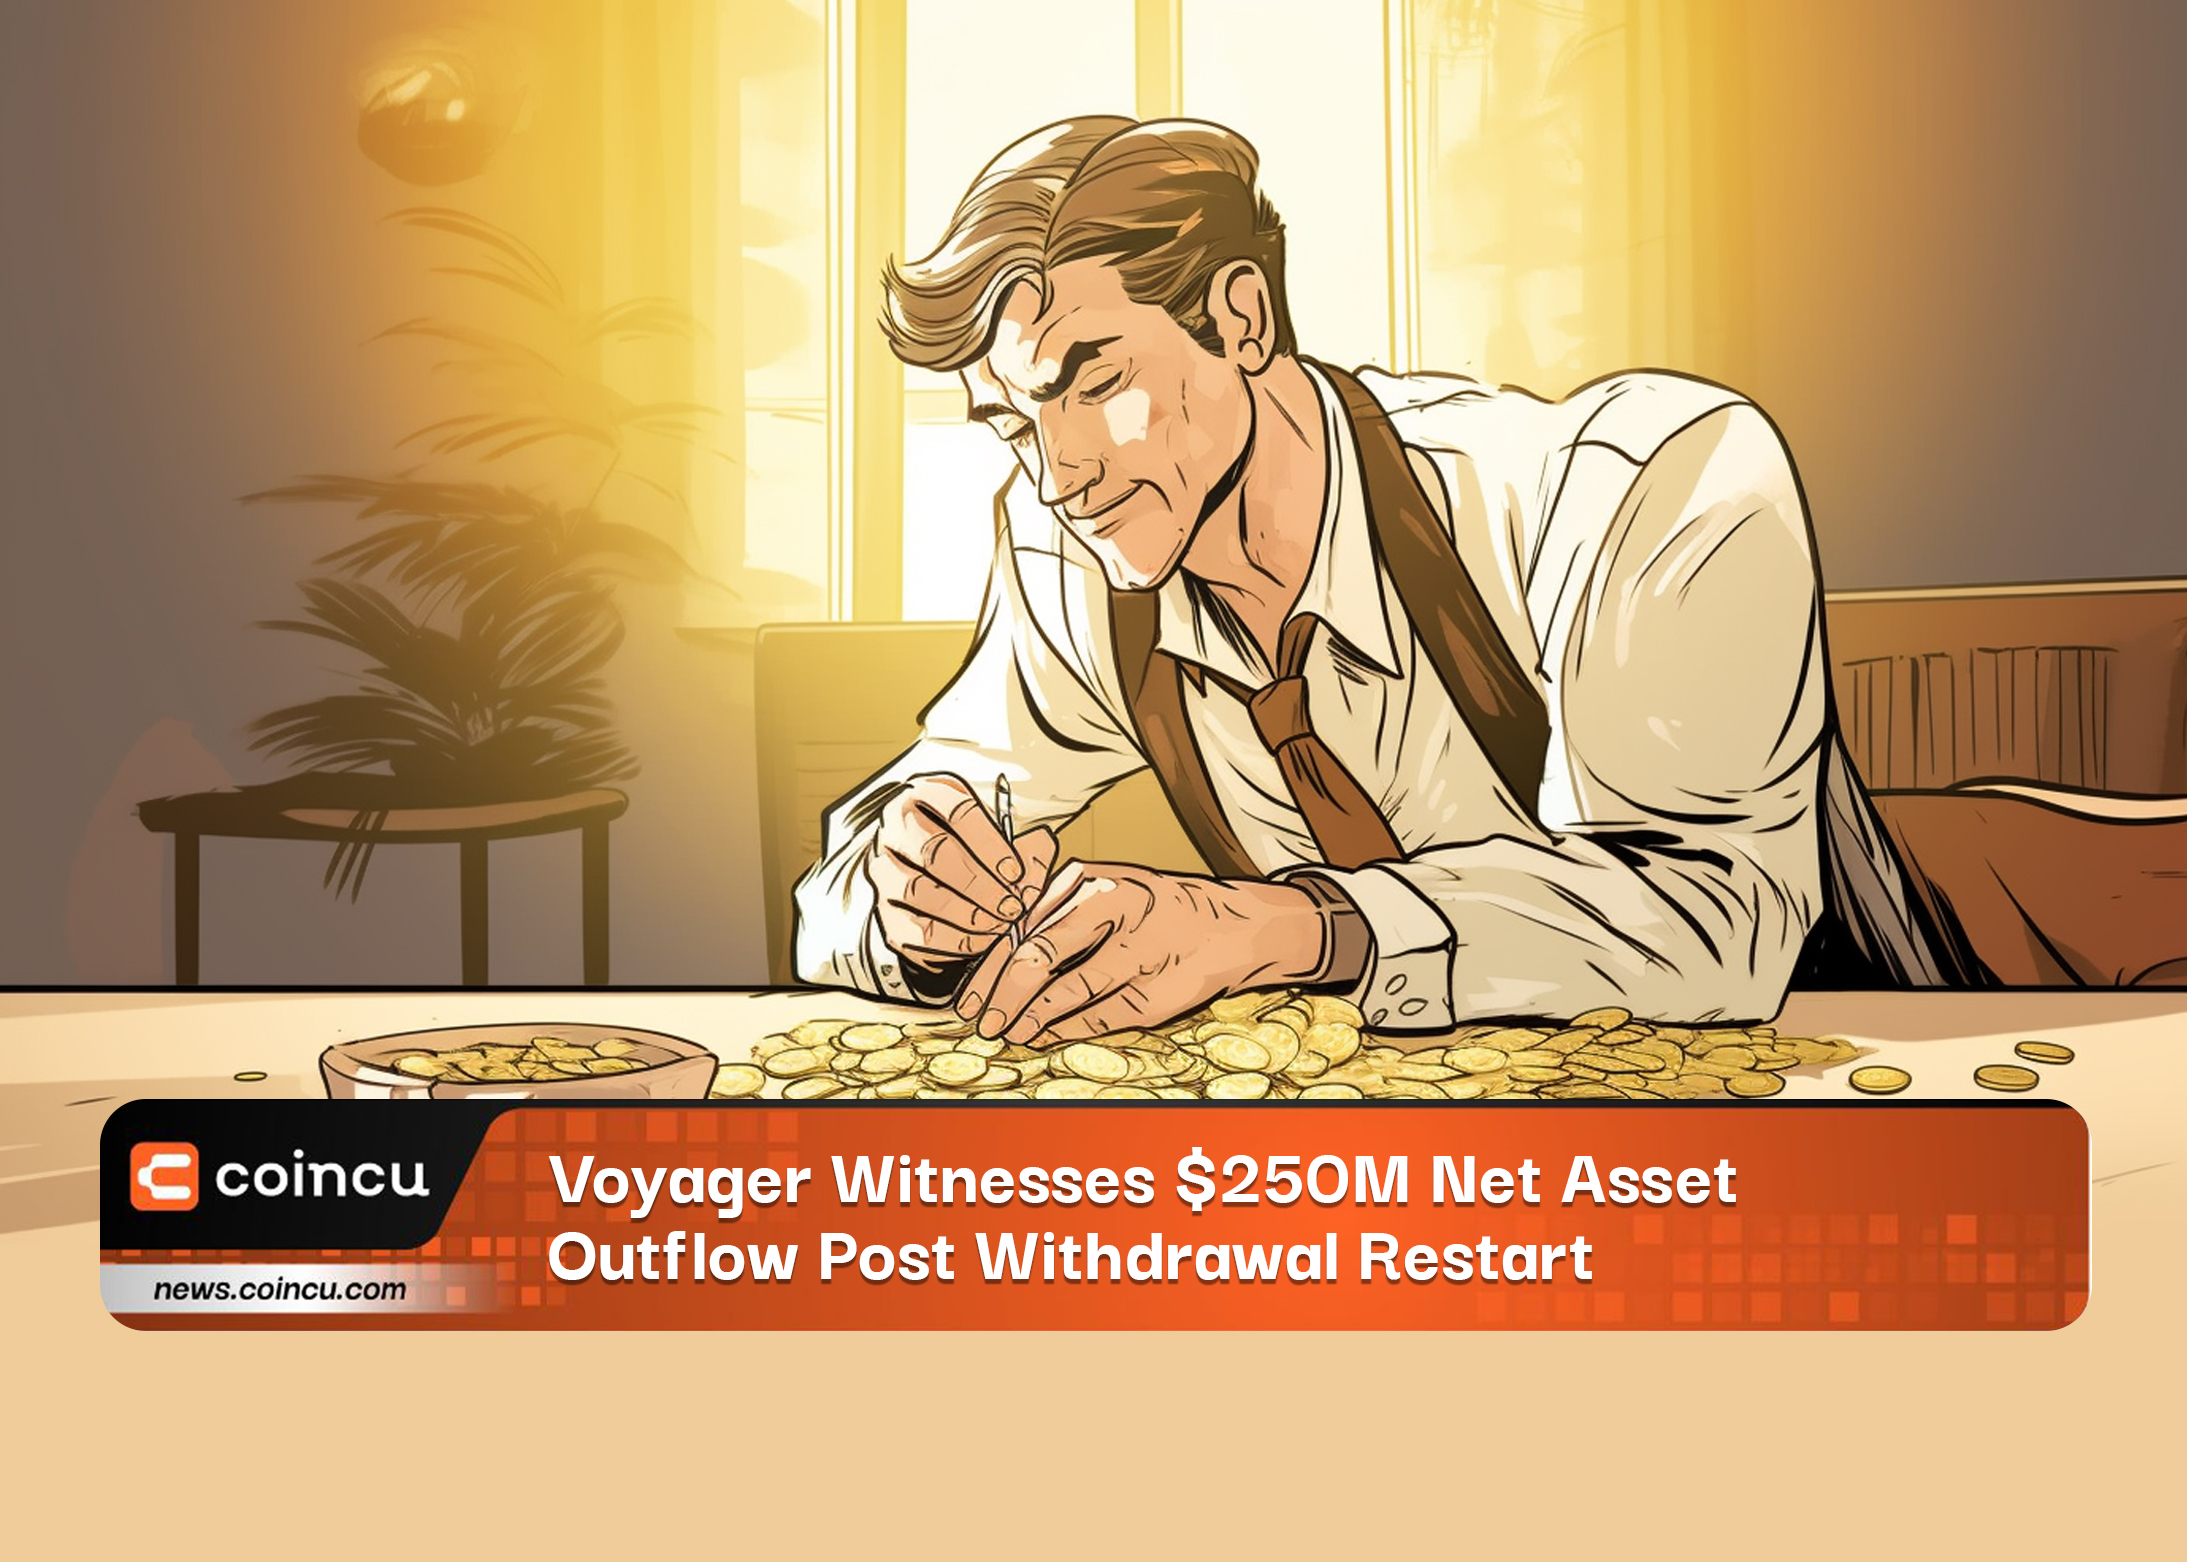 Voyager Witnesses 250M Net Asset Outflow Post Withdrawal Restart